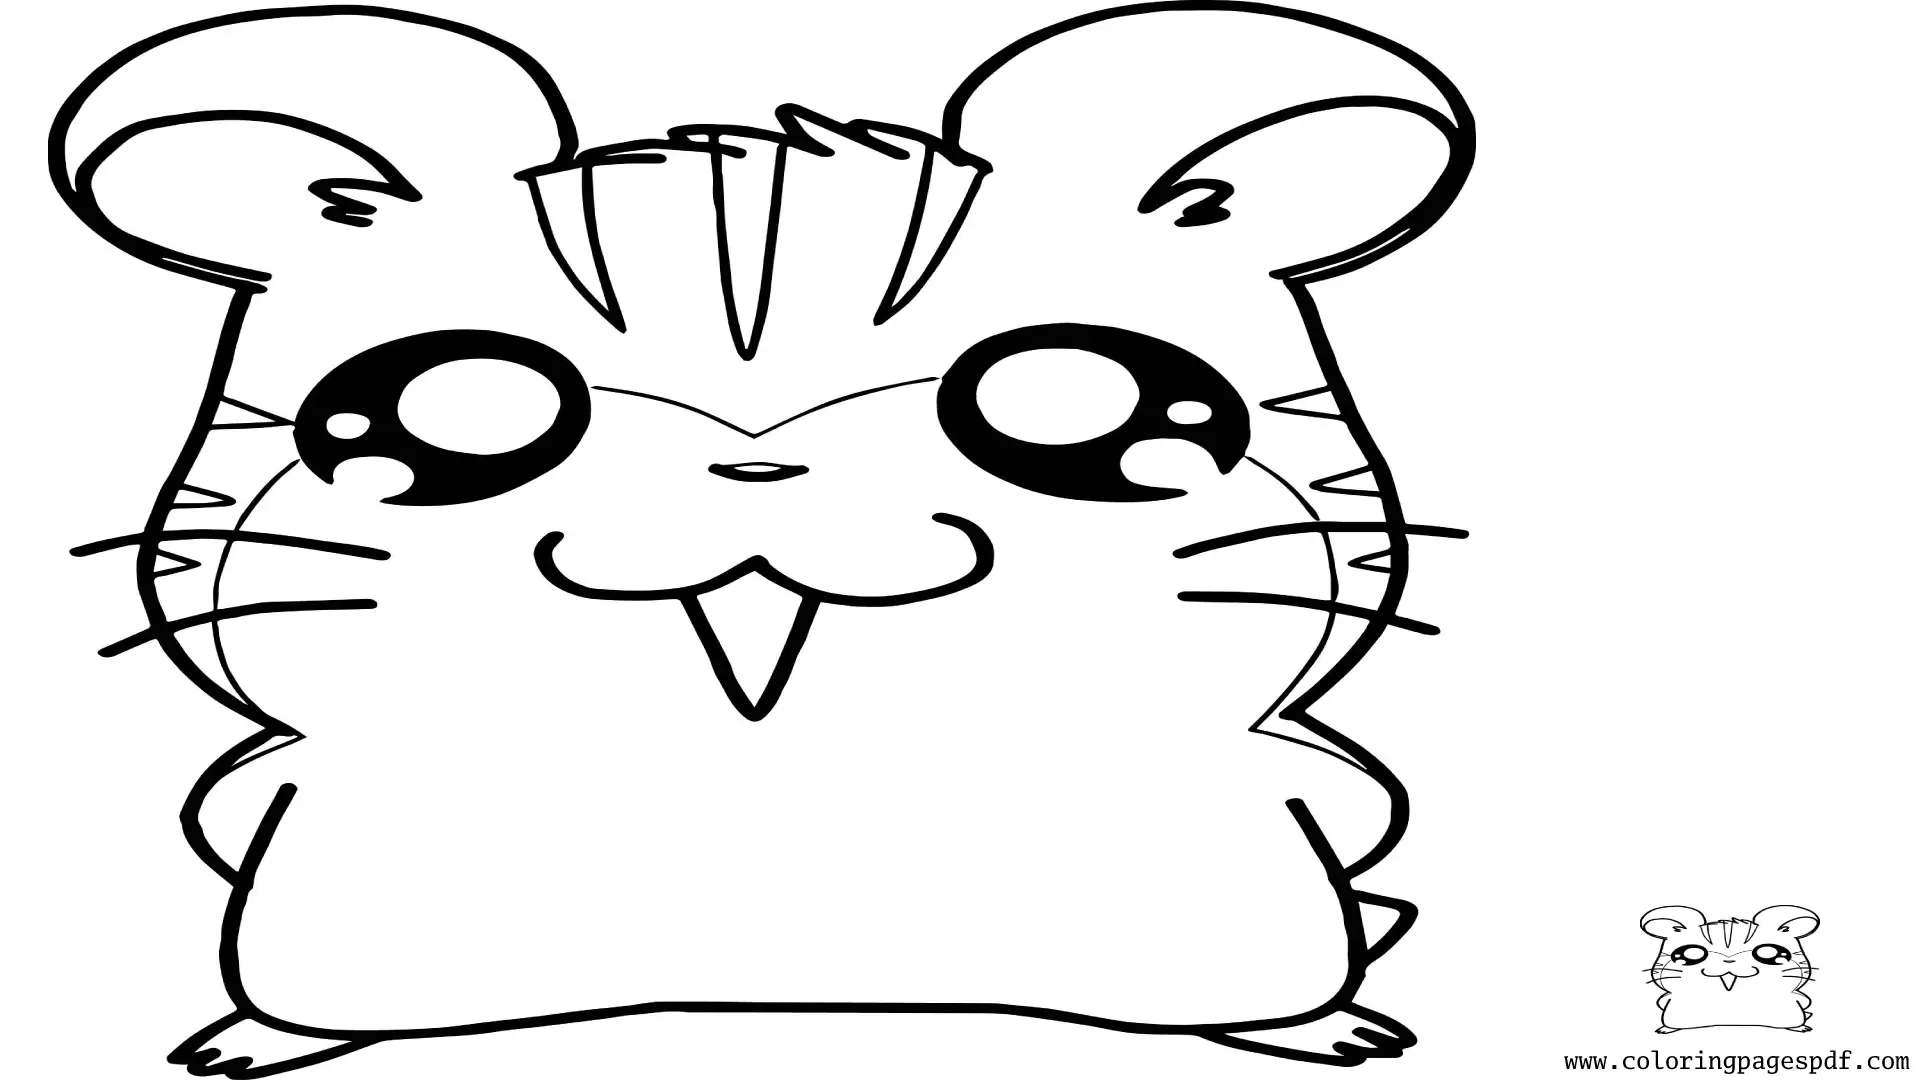 Coloring Page Of A Cute Hamster